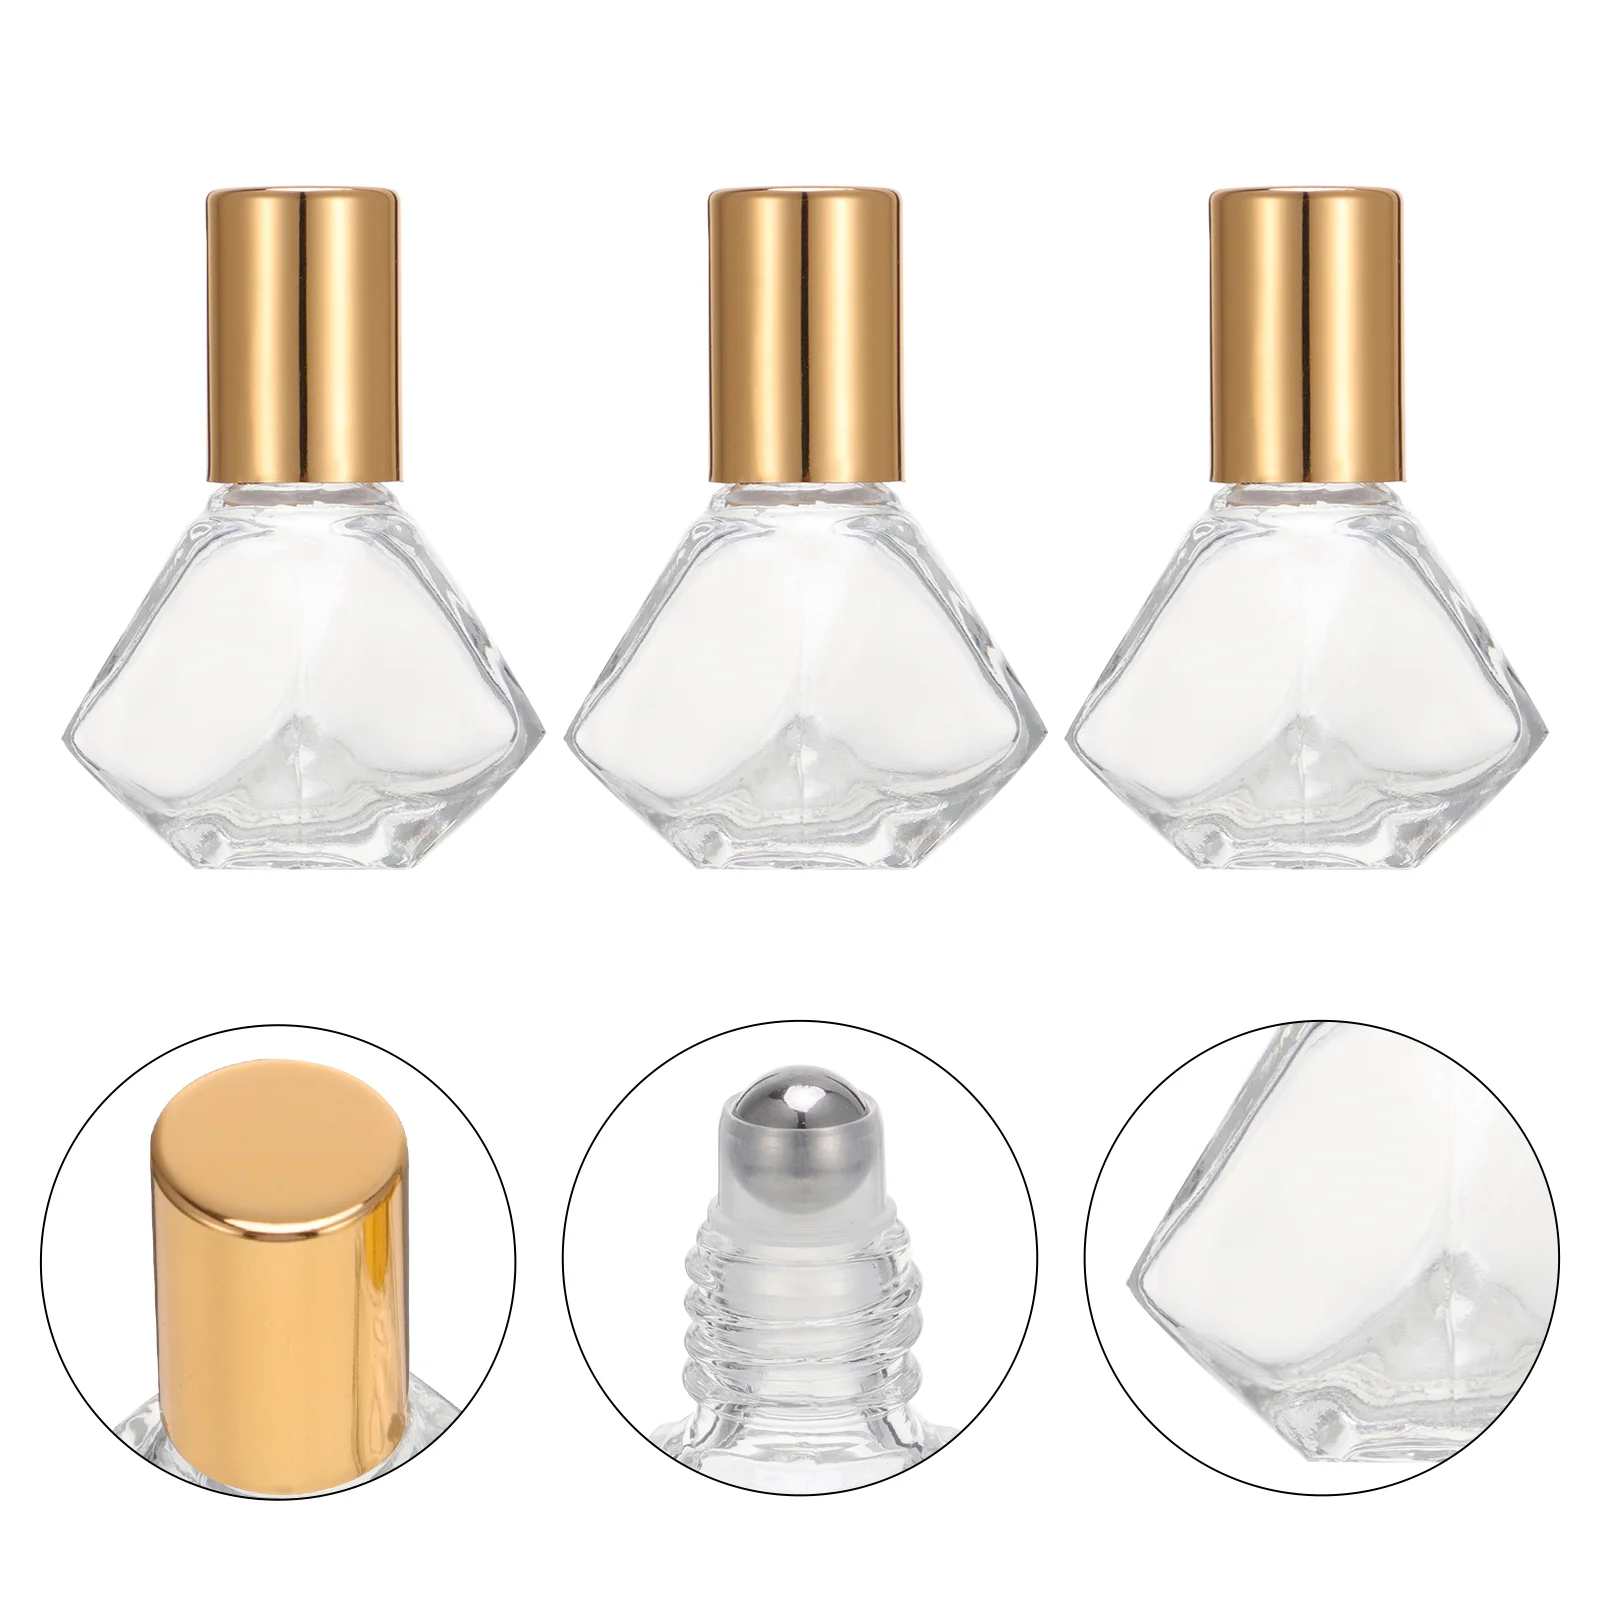 

12 Pcs Glass Roller Bottle Essential Oil Kit Ball Makeup Containers Bottles Perfume Portable Subpackaging